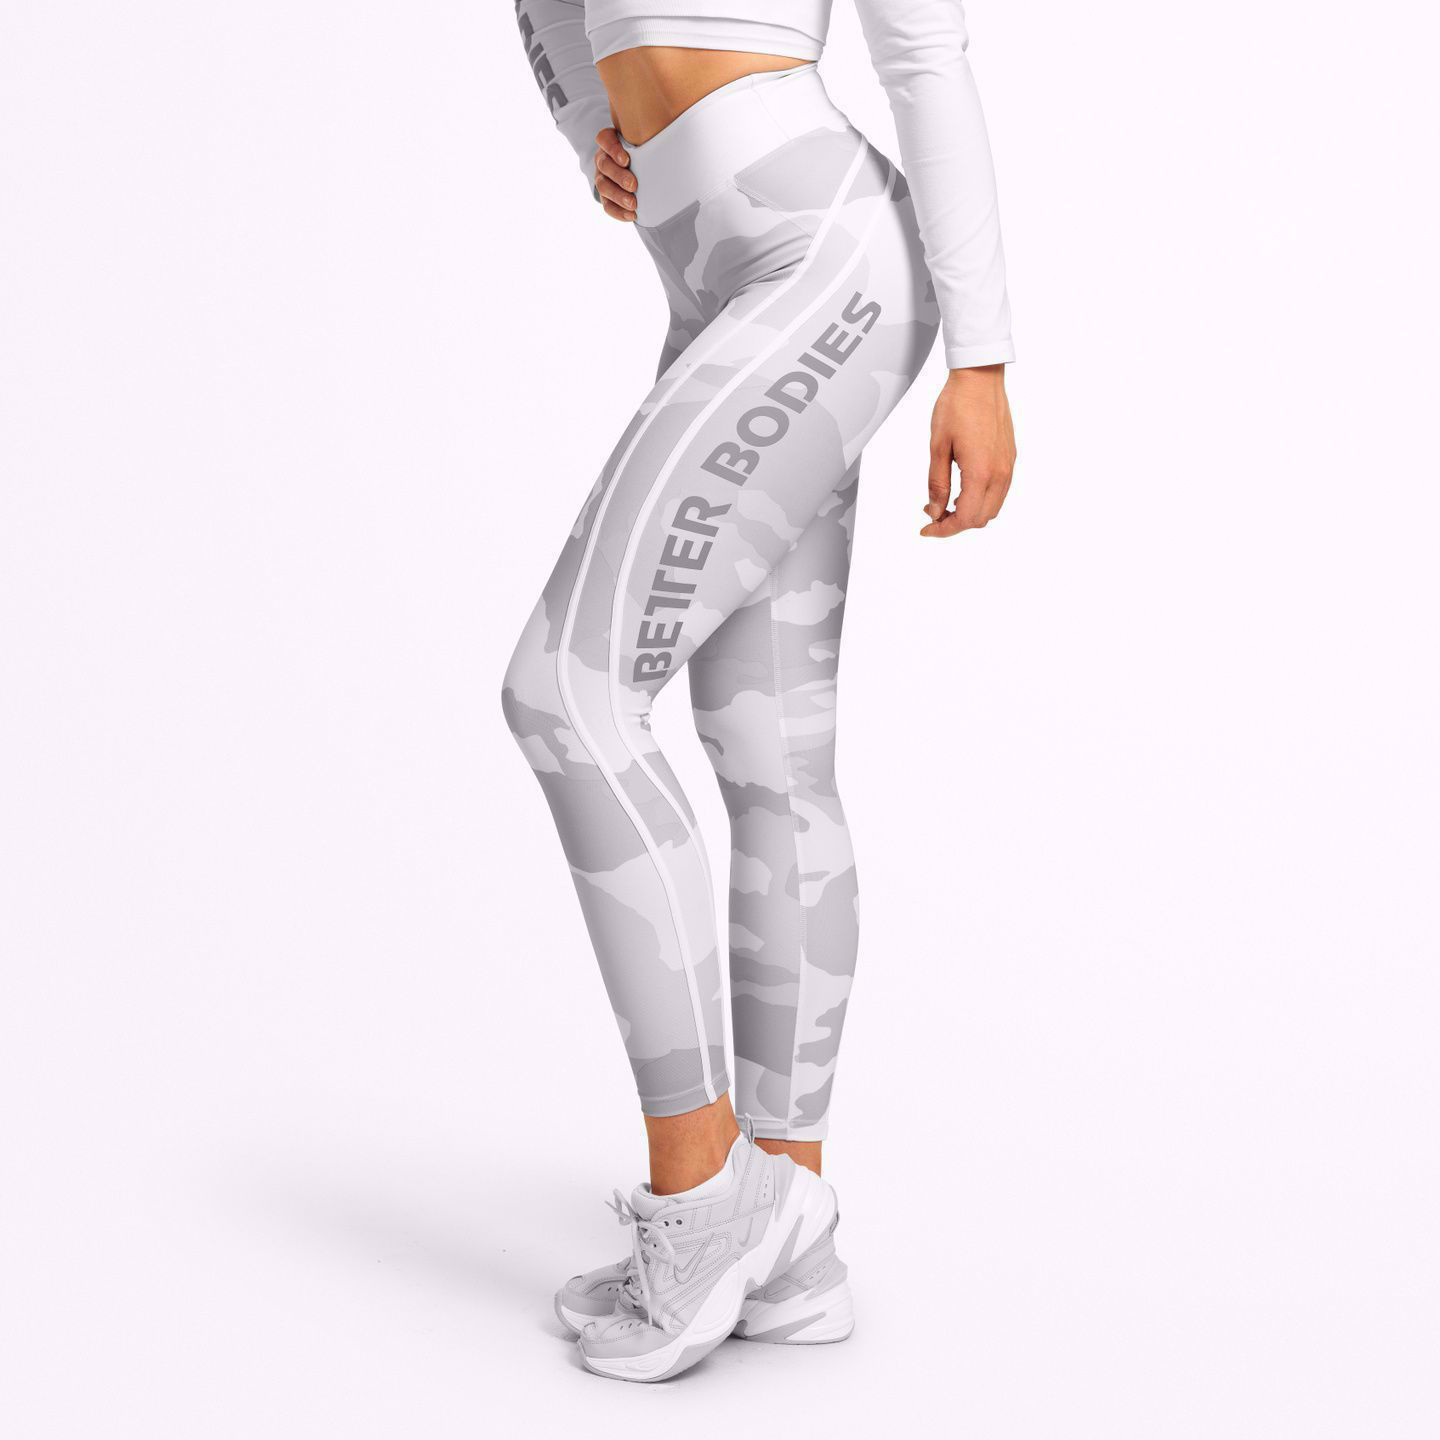 https://www.mgactivewear.com/images/thumbs/0000731_better-bodies-white-camo-high-performance-women-compression-leggings-for-training.jpeg